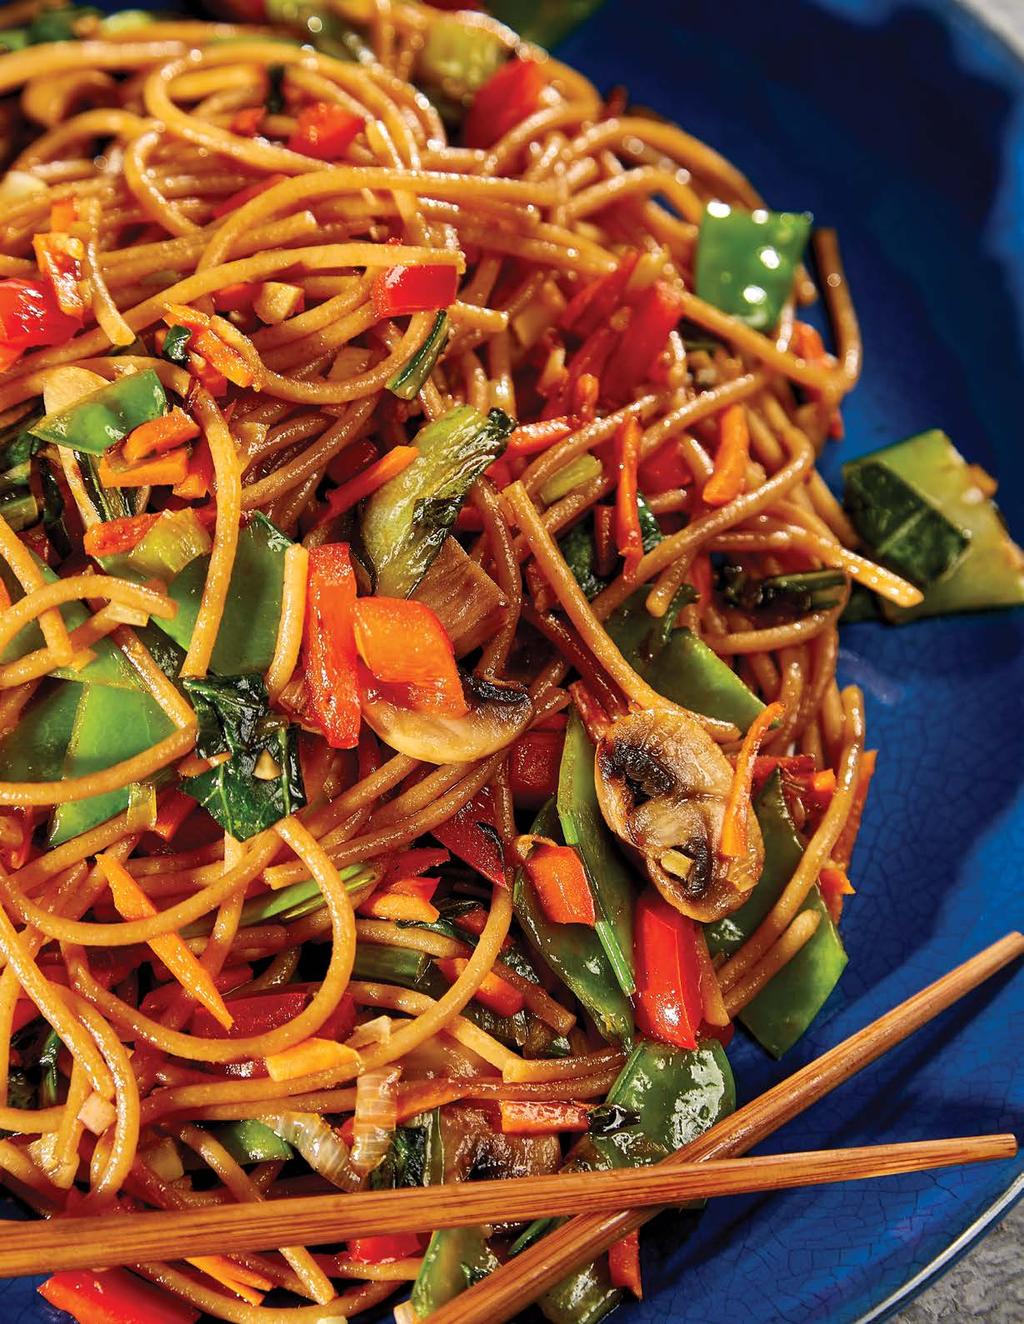 SERVES 6 Vegetable Lo Mein 6 shiitake mushrooms, stems removed & sliced 3 tbsp. olive oil 10 snow peas 1 small onion, peeled & diced small ½ red pepper, seeded & diced small 1.